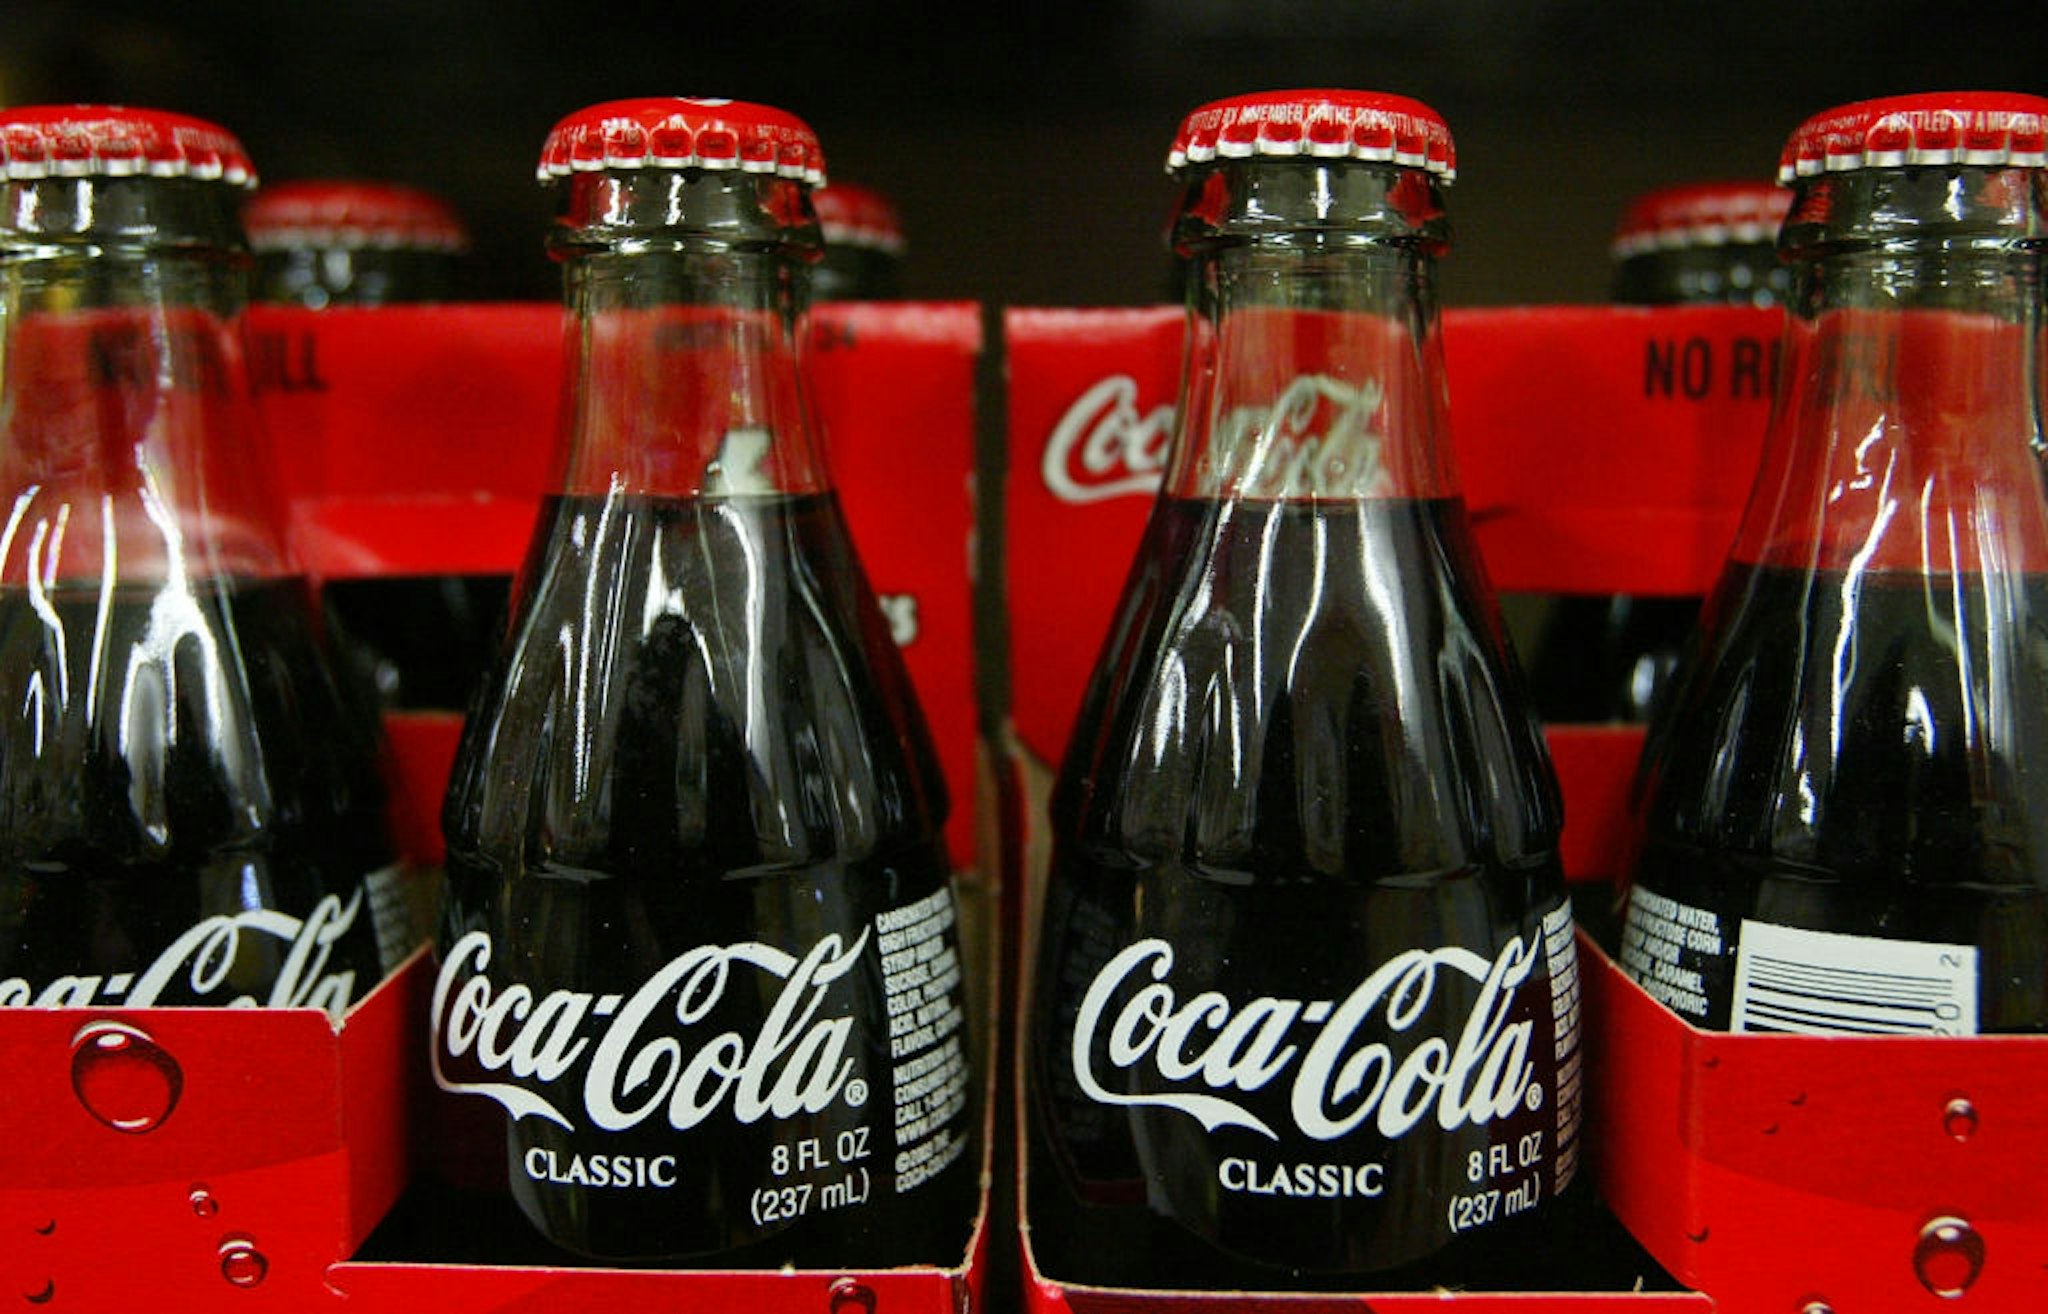 SAN FRANCISCO - JANUARY 16: Bottles of Coca-Cola are seen on the shelf at Tower Market January 16, 2004 in San Francisco, California. Coca-Cola is being investigated by U.S. regulators over allegations raised by a former employee that it had inflated its earnings.